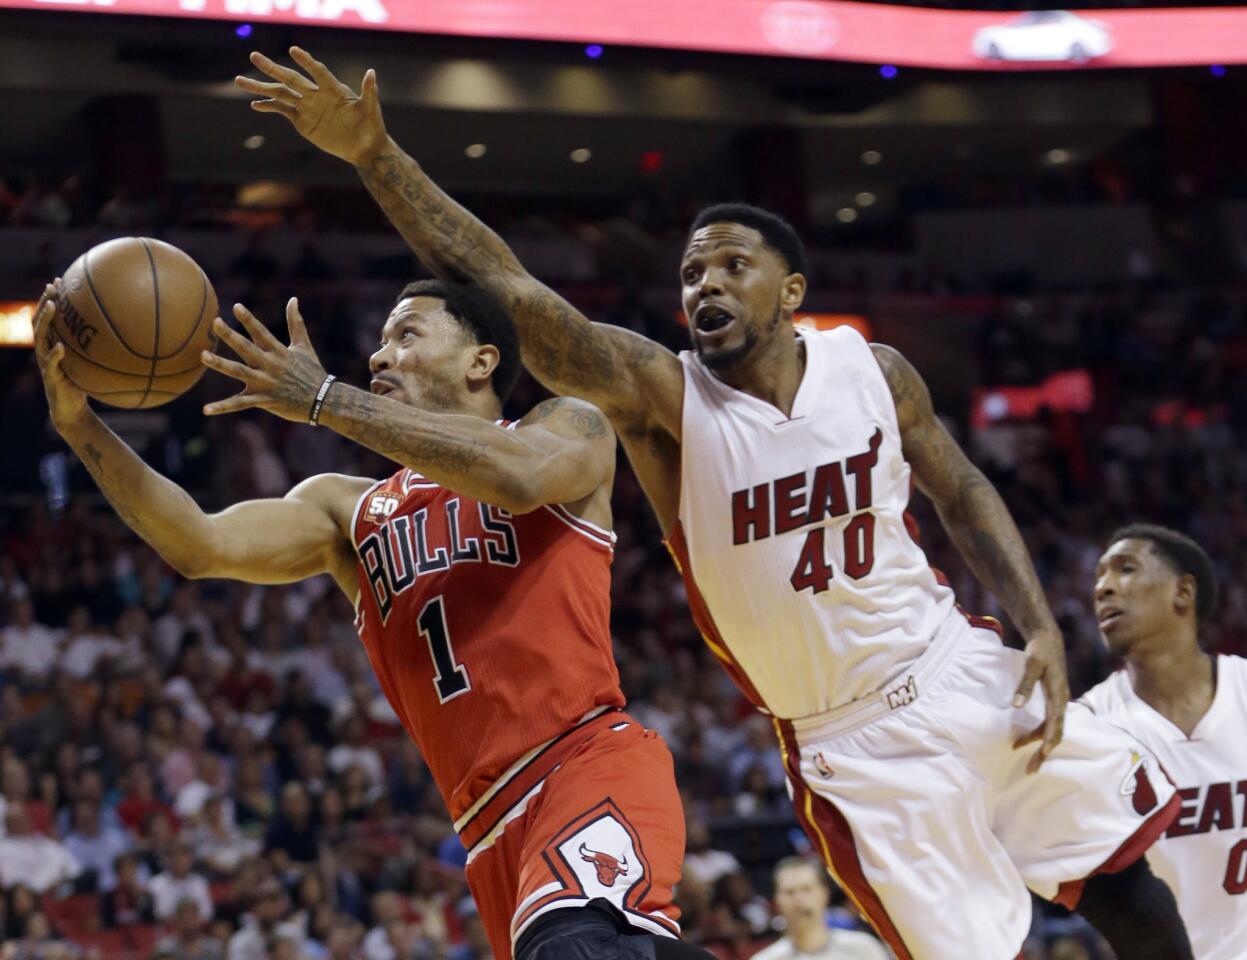 Derrick Rose goes to the basket as the Heat's Udonis Haslem defends in the first half on April 7, 2016.